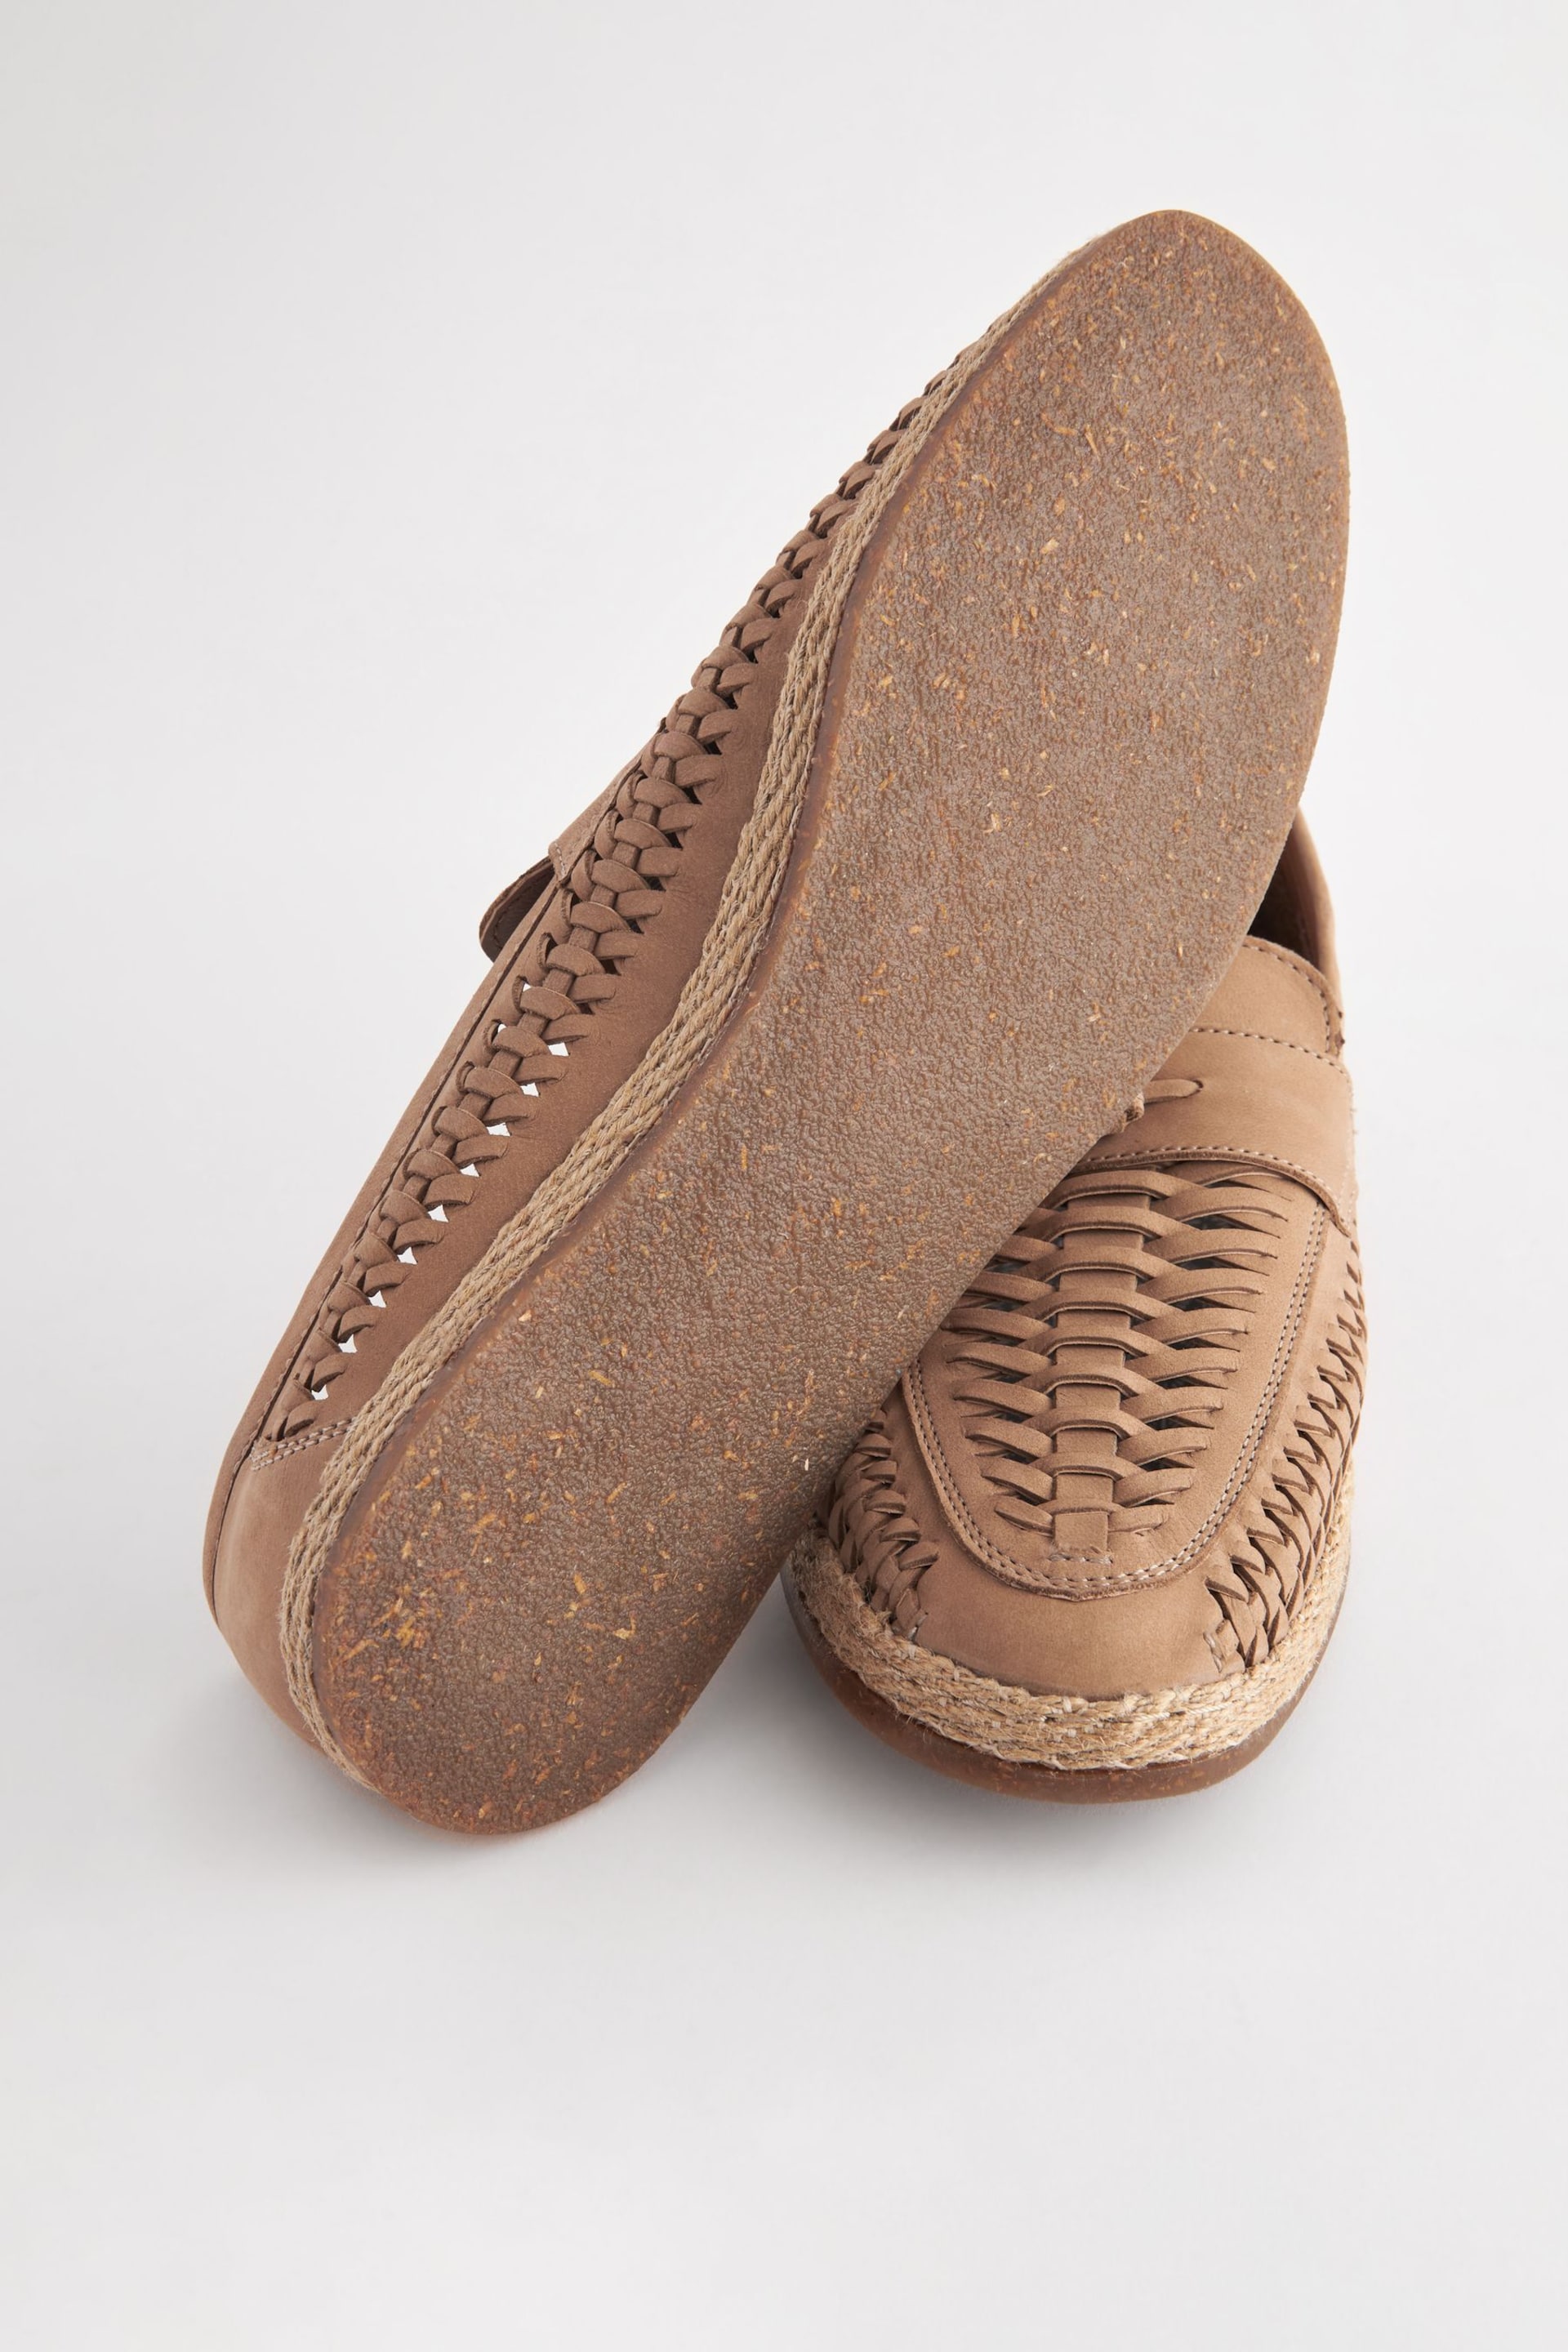 Stone Leather Woven Loafers - Image 7 of 7